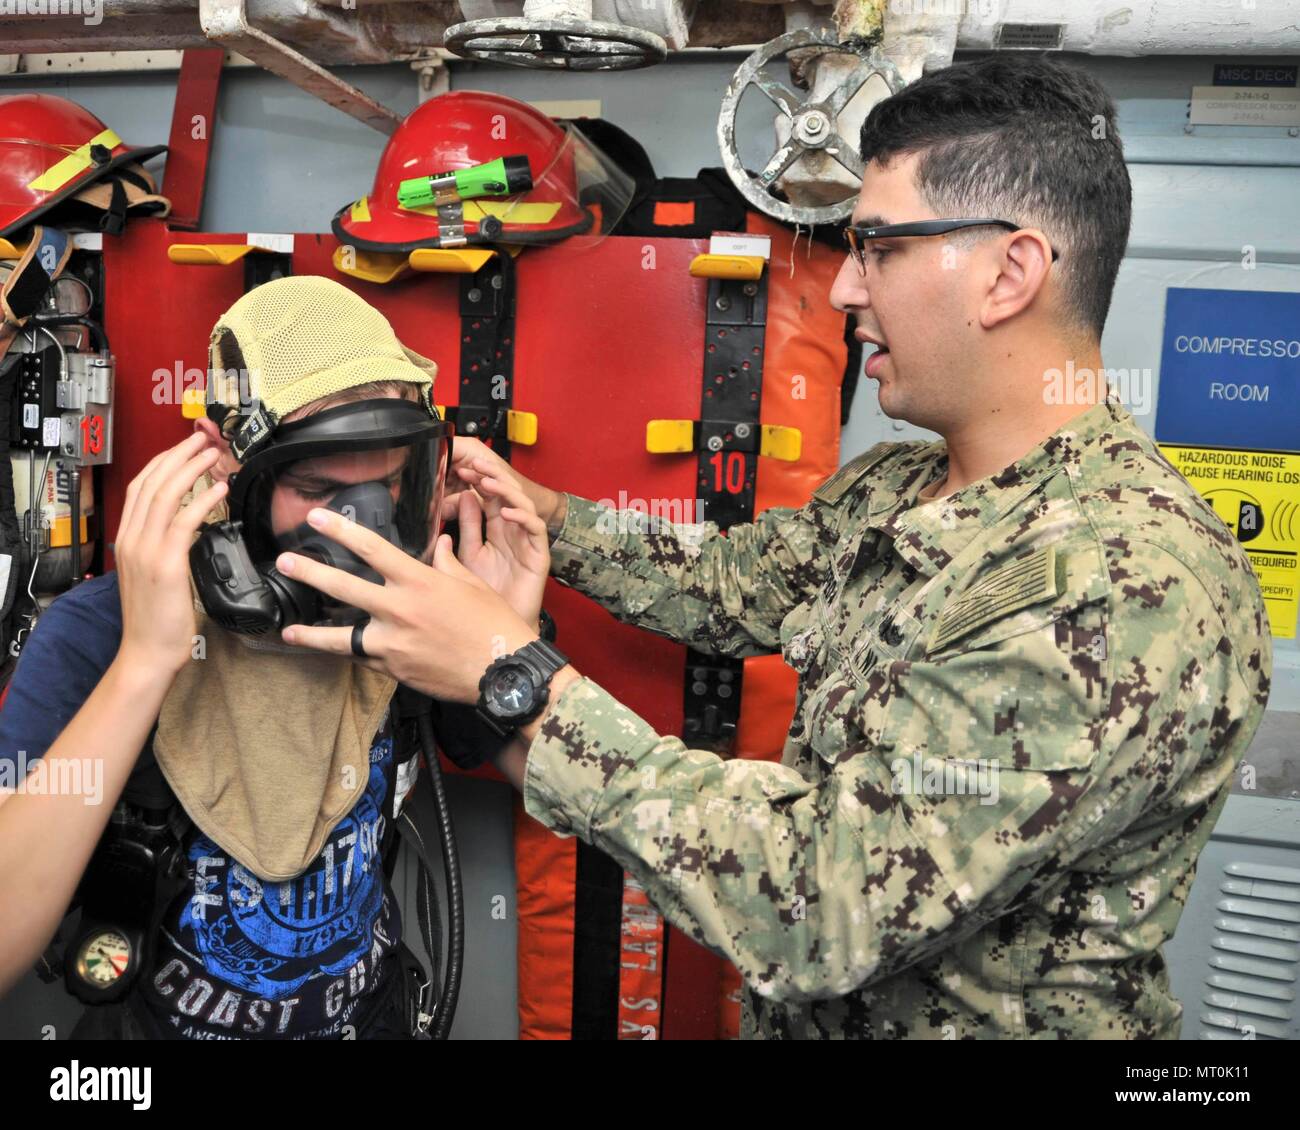 170714-N-YJ133-095 (POLARIS POINT, Guam) July 14, 2017 – Damage Controlman 3rd Class Felipe Zepeda helps a sea cadet from U.S. Naval Sea Cadet Corps Marianas Division Guam don flash gear during a tour of submarine tender USS Emory S. Land (AS 39), July 14. Land and USS Frank Cable (AS 40), the U.S. Navy’s only two submarine tenders, both homeported in Apra Harbor, Guam, provide maintenance, hotel services and logistical support to submarines and surface ships in the U.S. 5th and 7th Fleet areas of operation. (U.S. Navy photo by Mass Communication Specialist 2nd Class Richard A. Miller/RELEASED Stock Photo